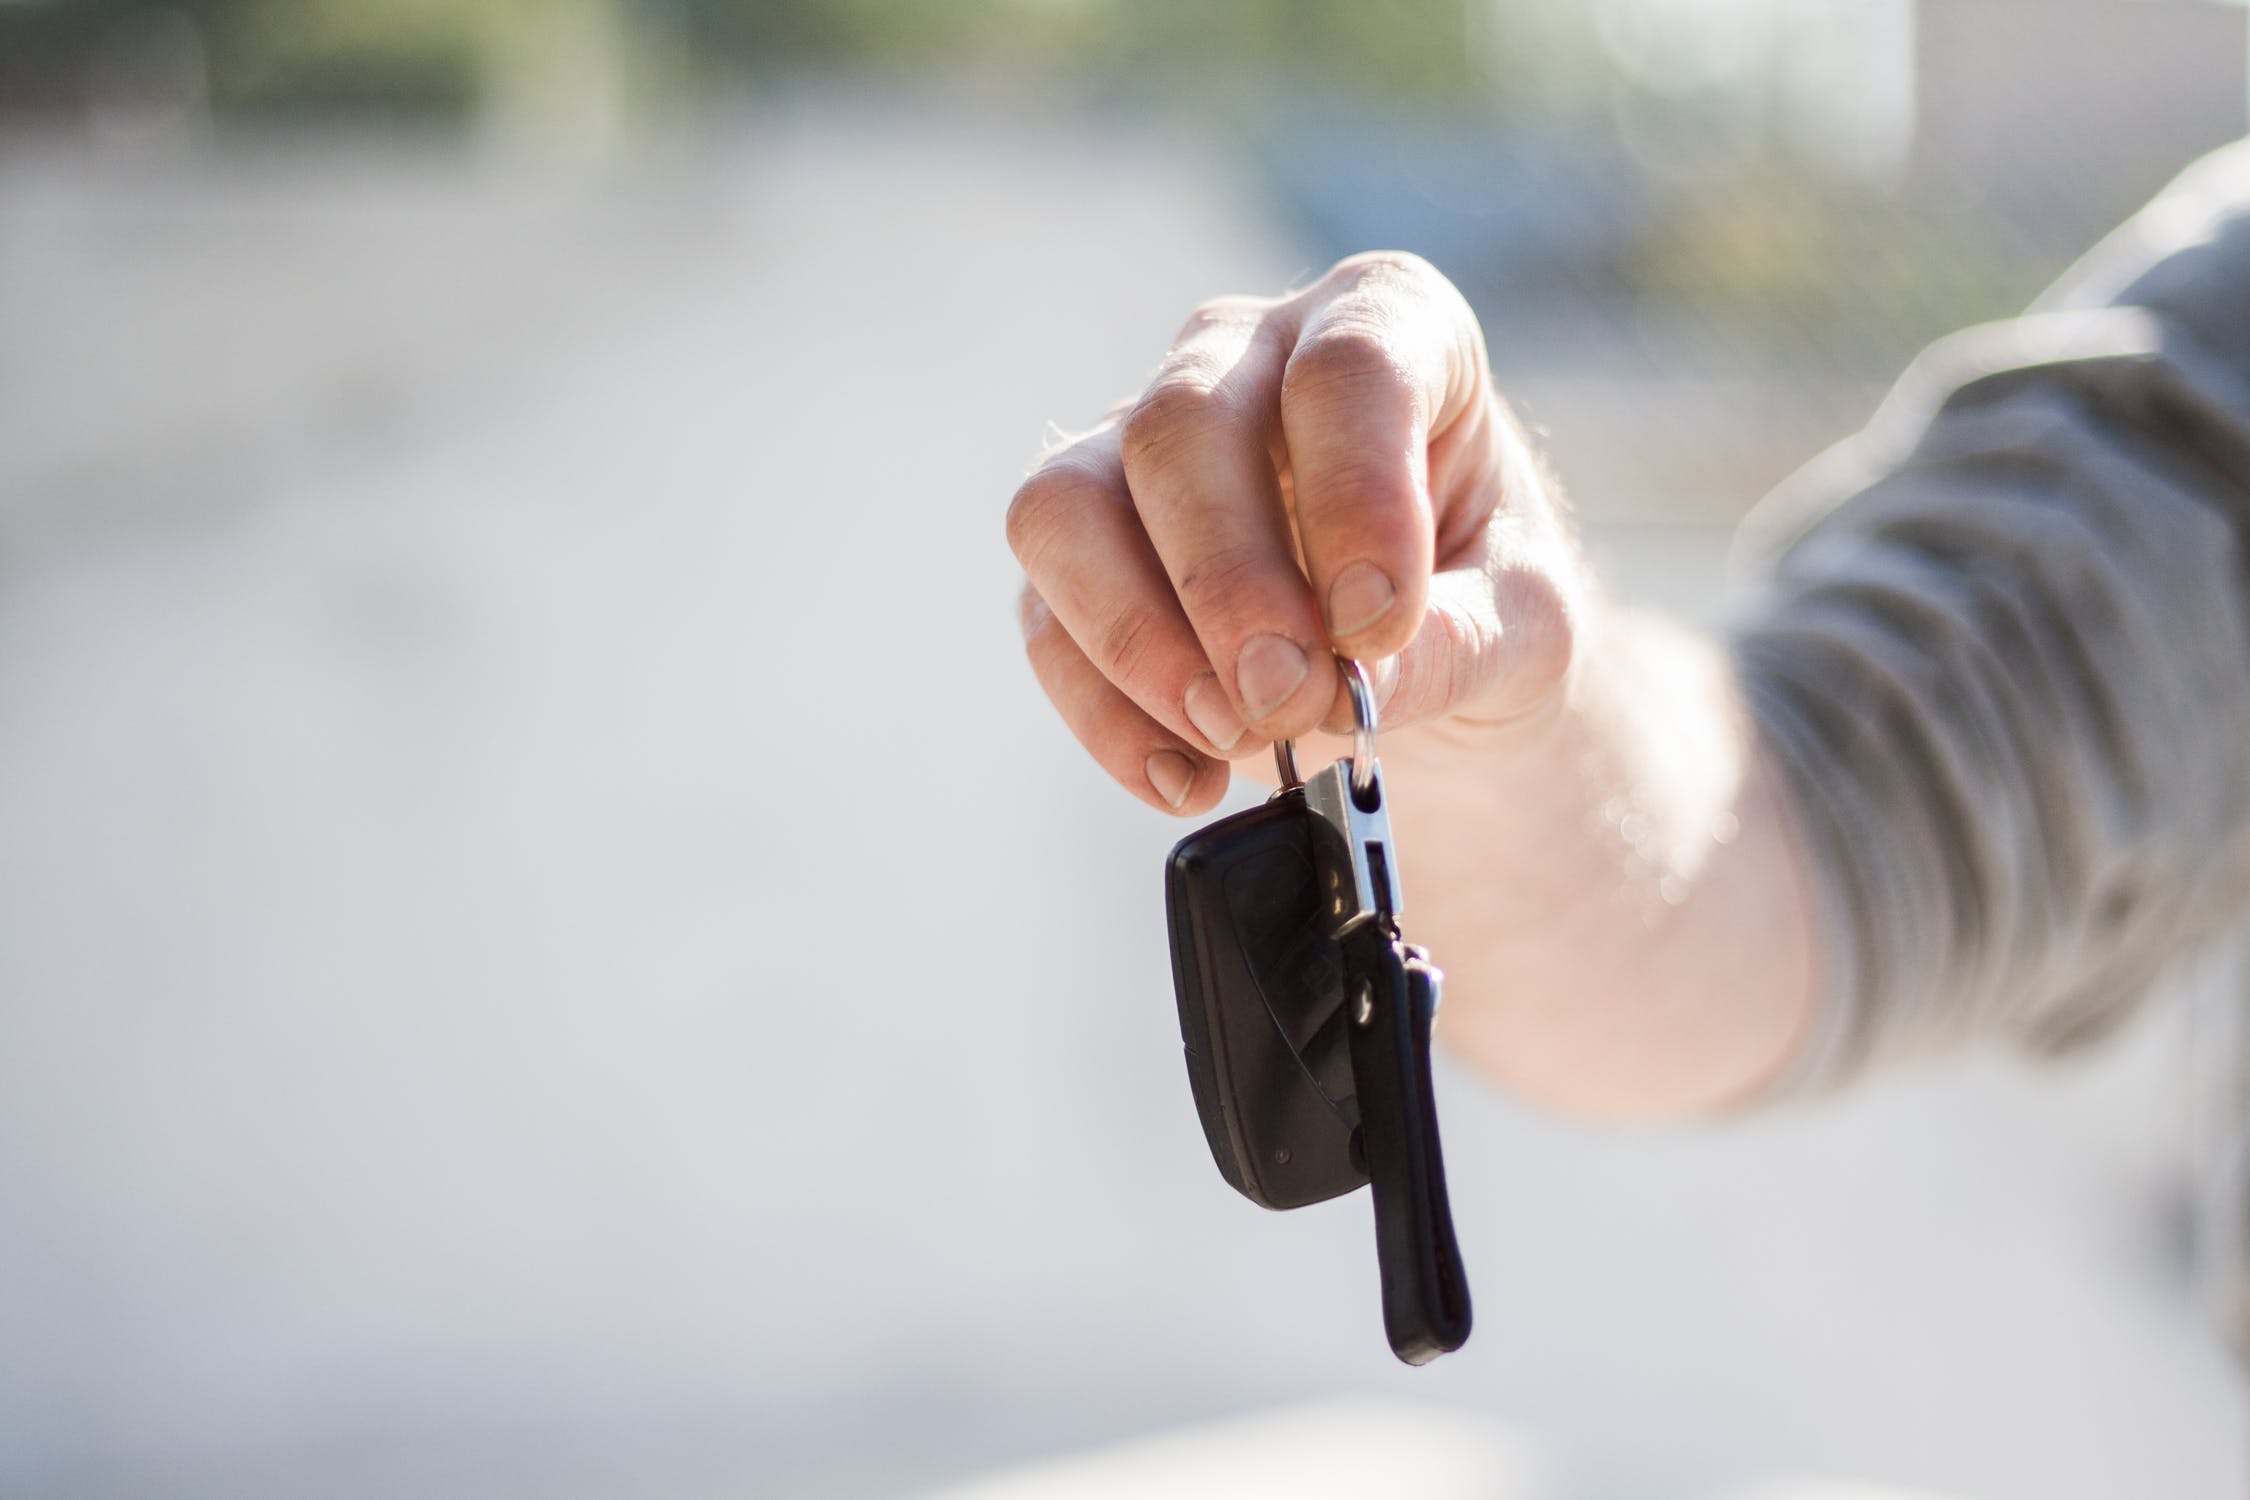 Cheap Car Hire - If your budget is small, you needn't compromise